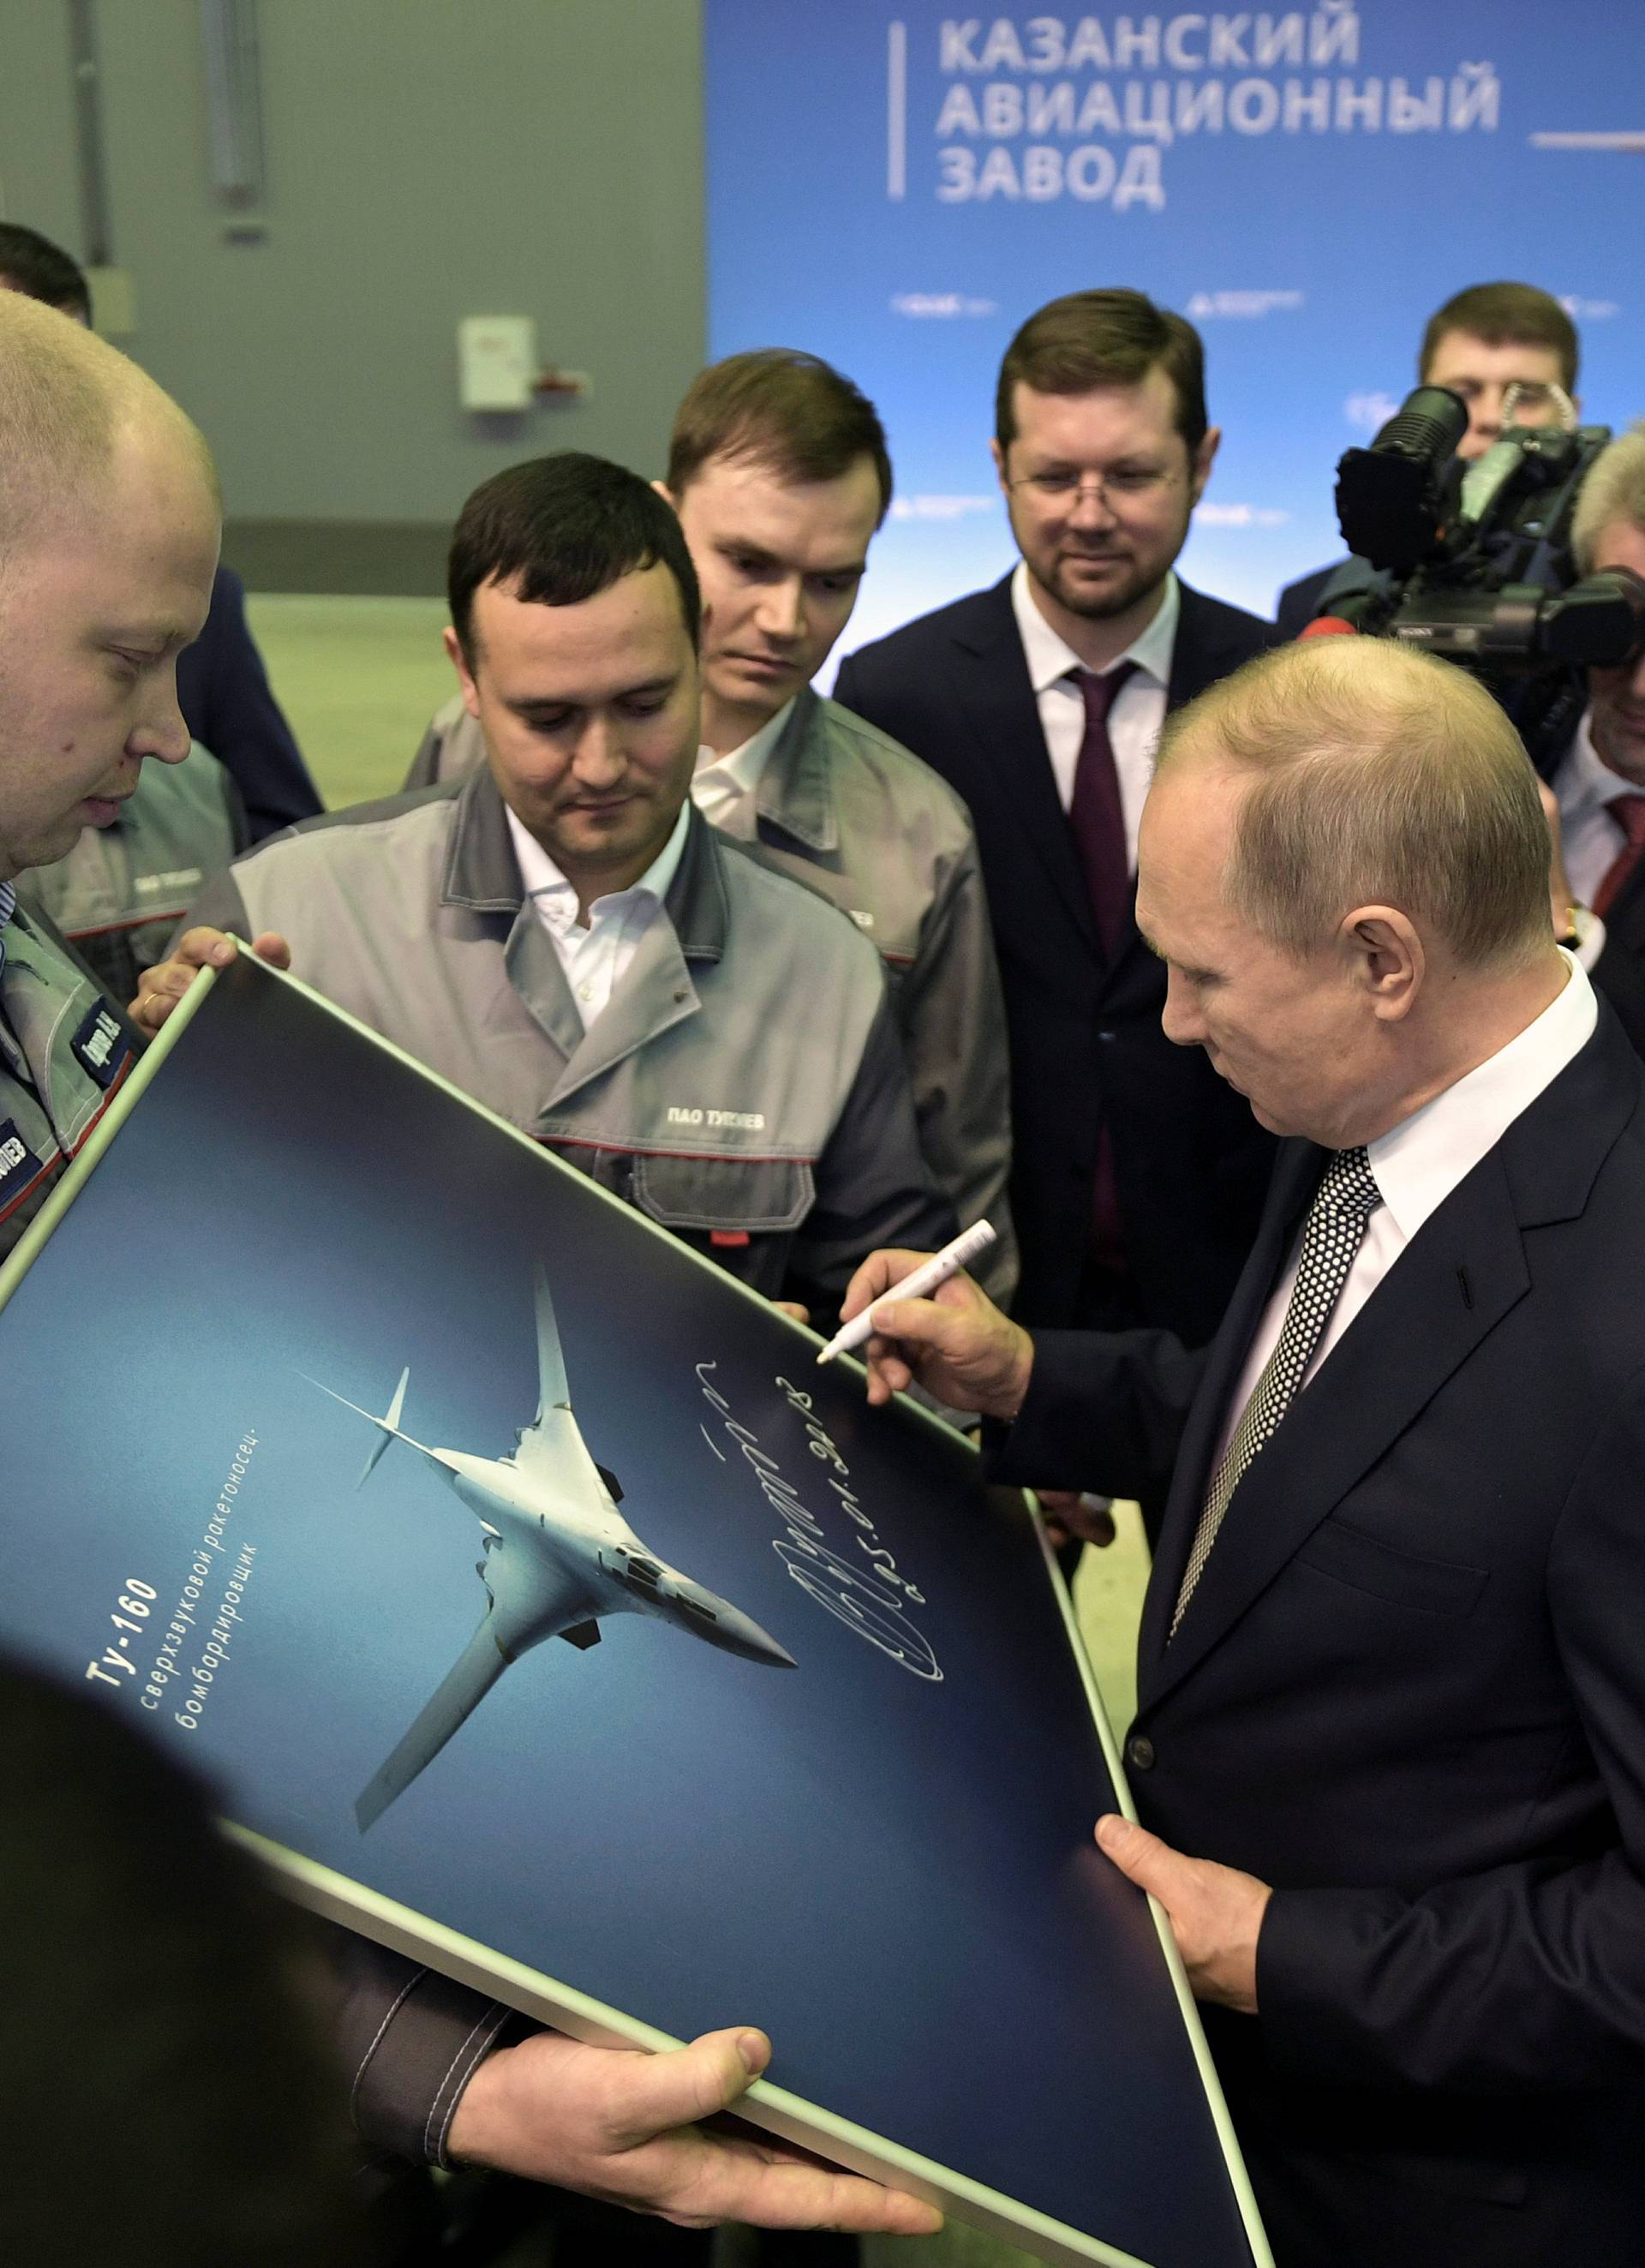 Russian President Vladimir Putin signs a picture of a TU-160M nuclear bomber during a visit to the Gorbunov Aviation factory in Kazan